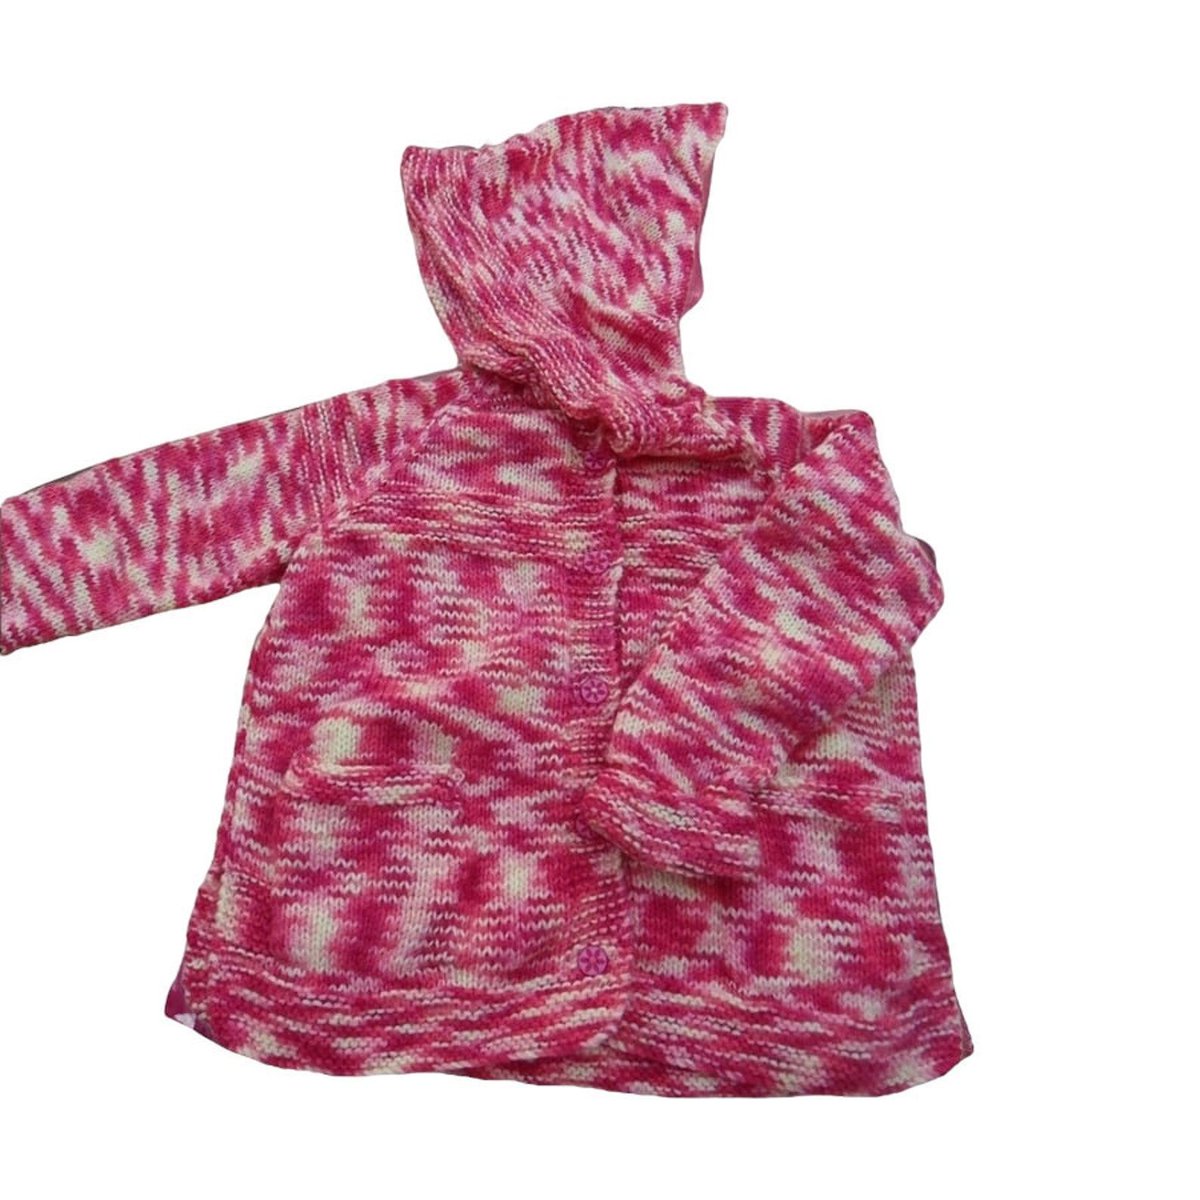 Looking for a unique children's gift? This hand-knitted, hooded girls cardigan in vibrant red and yellow is perfect for 3-4 years old. Handmade with love, find it on #Etsy at #Knittingtopia. #handmade #childrensknitwear #mh#MHHSBD #craftbizparty knittingtopia.etsy.com/listing/170832…